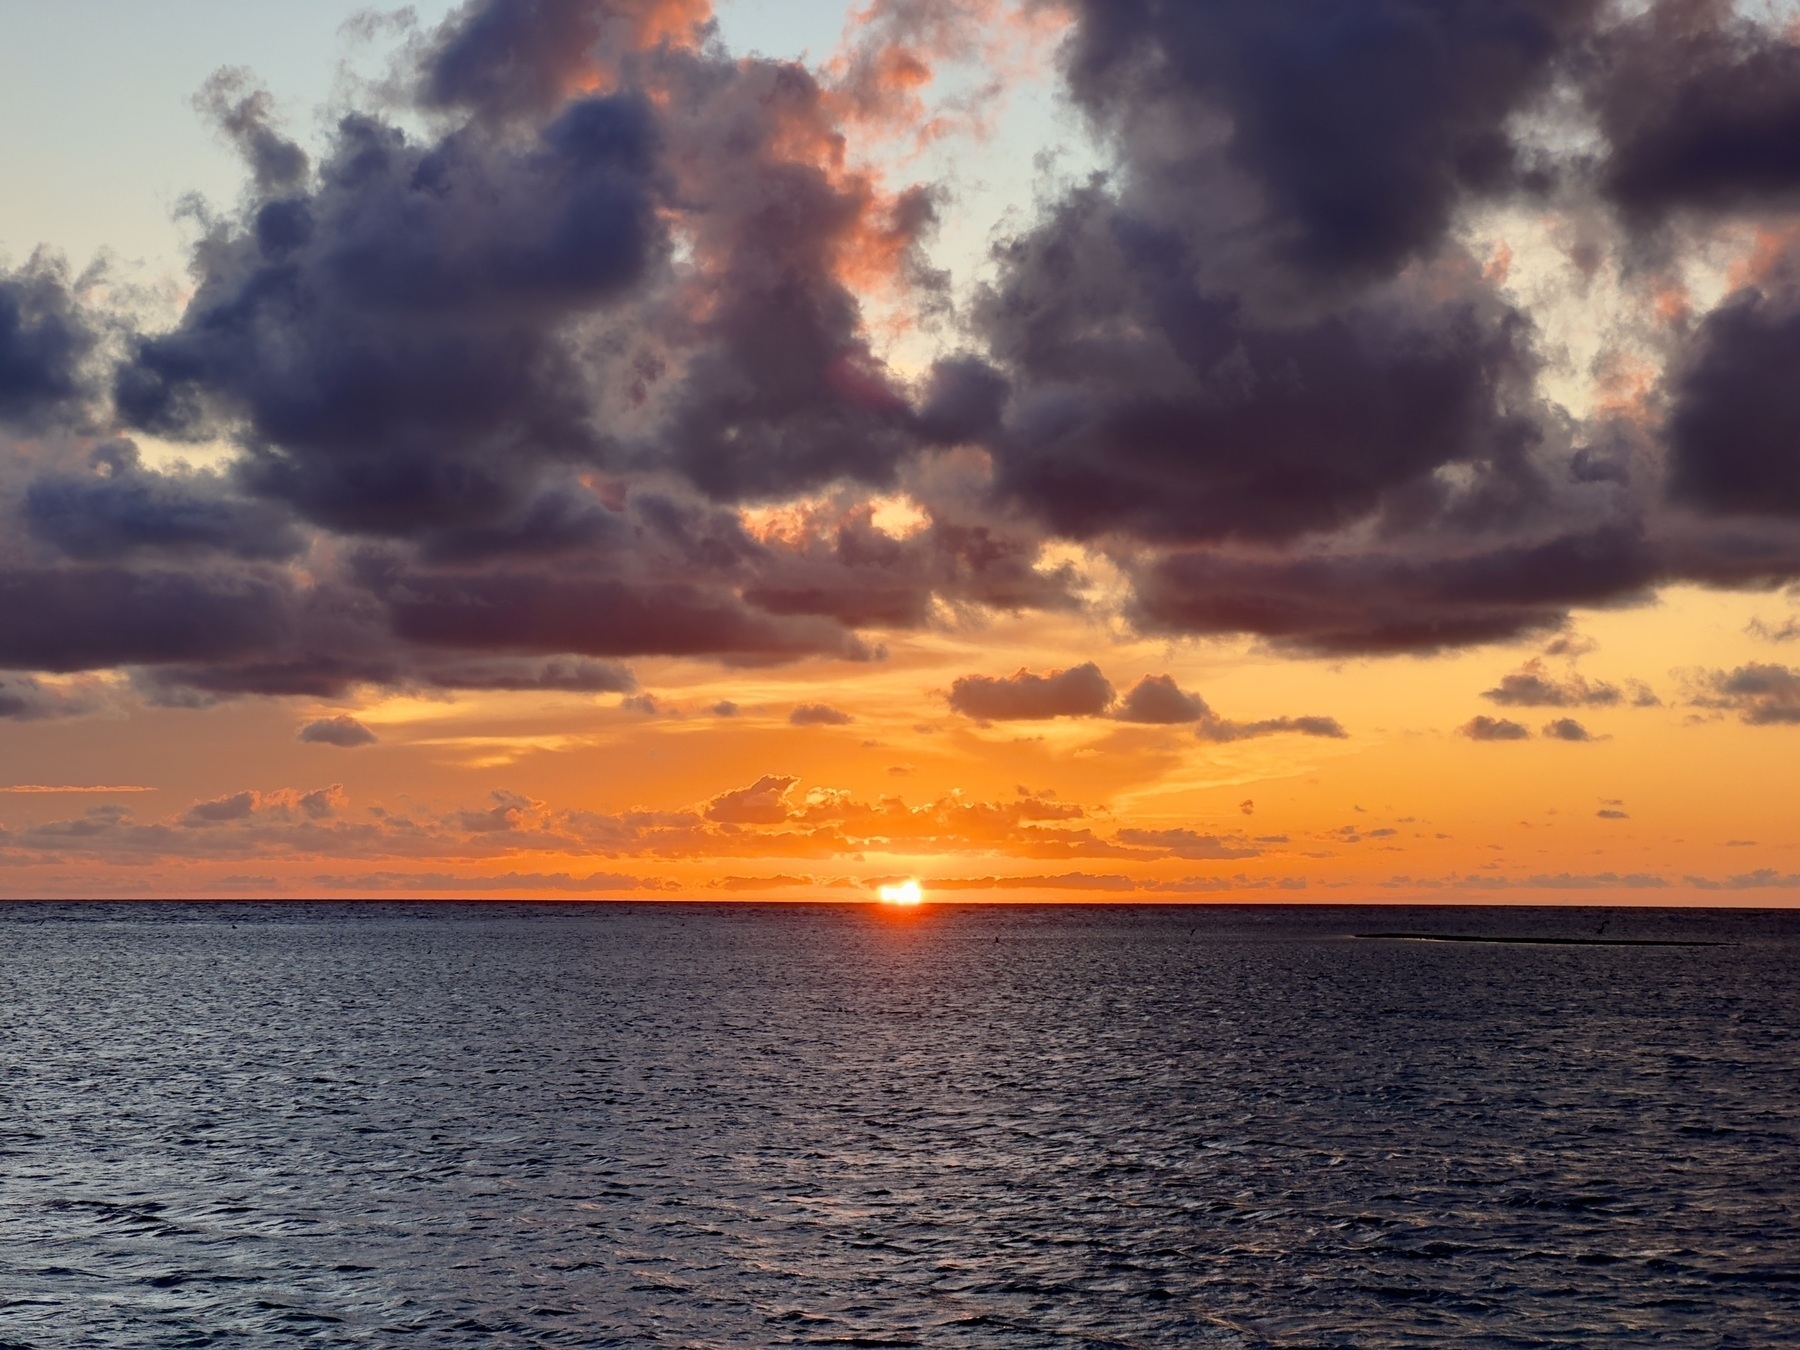 A rich orange sunset, the sun disappearing below an ocean horizon, grey clouds lit with deep purples and oranges.